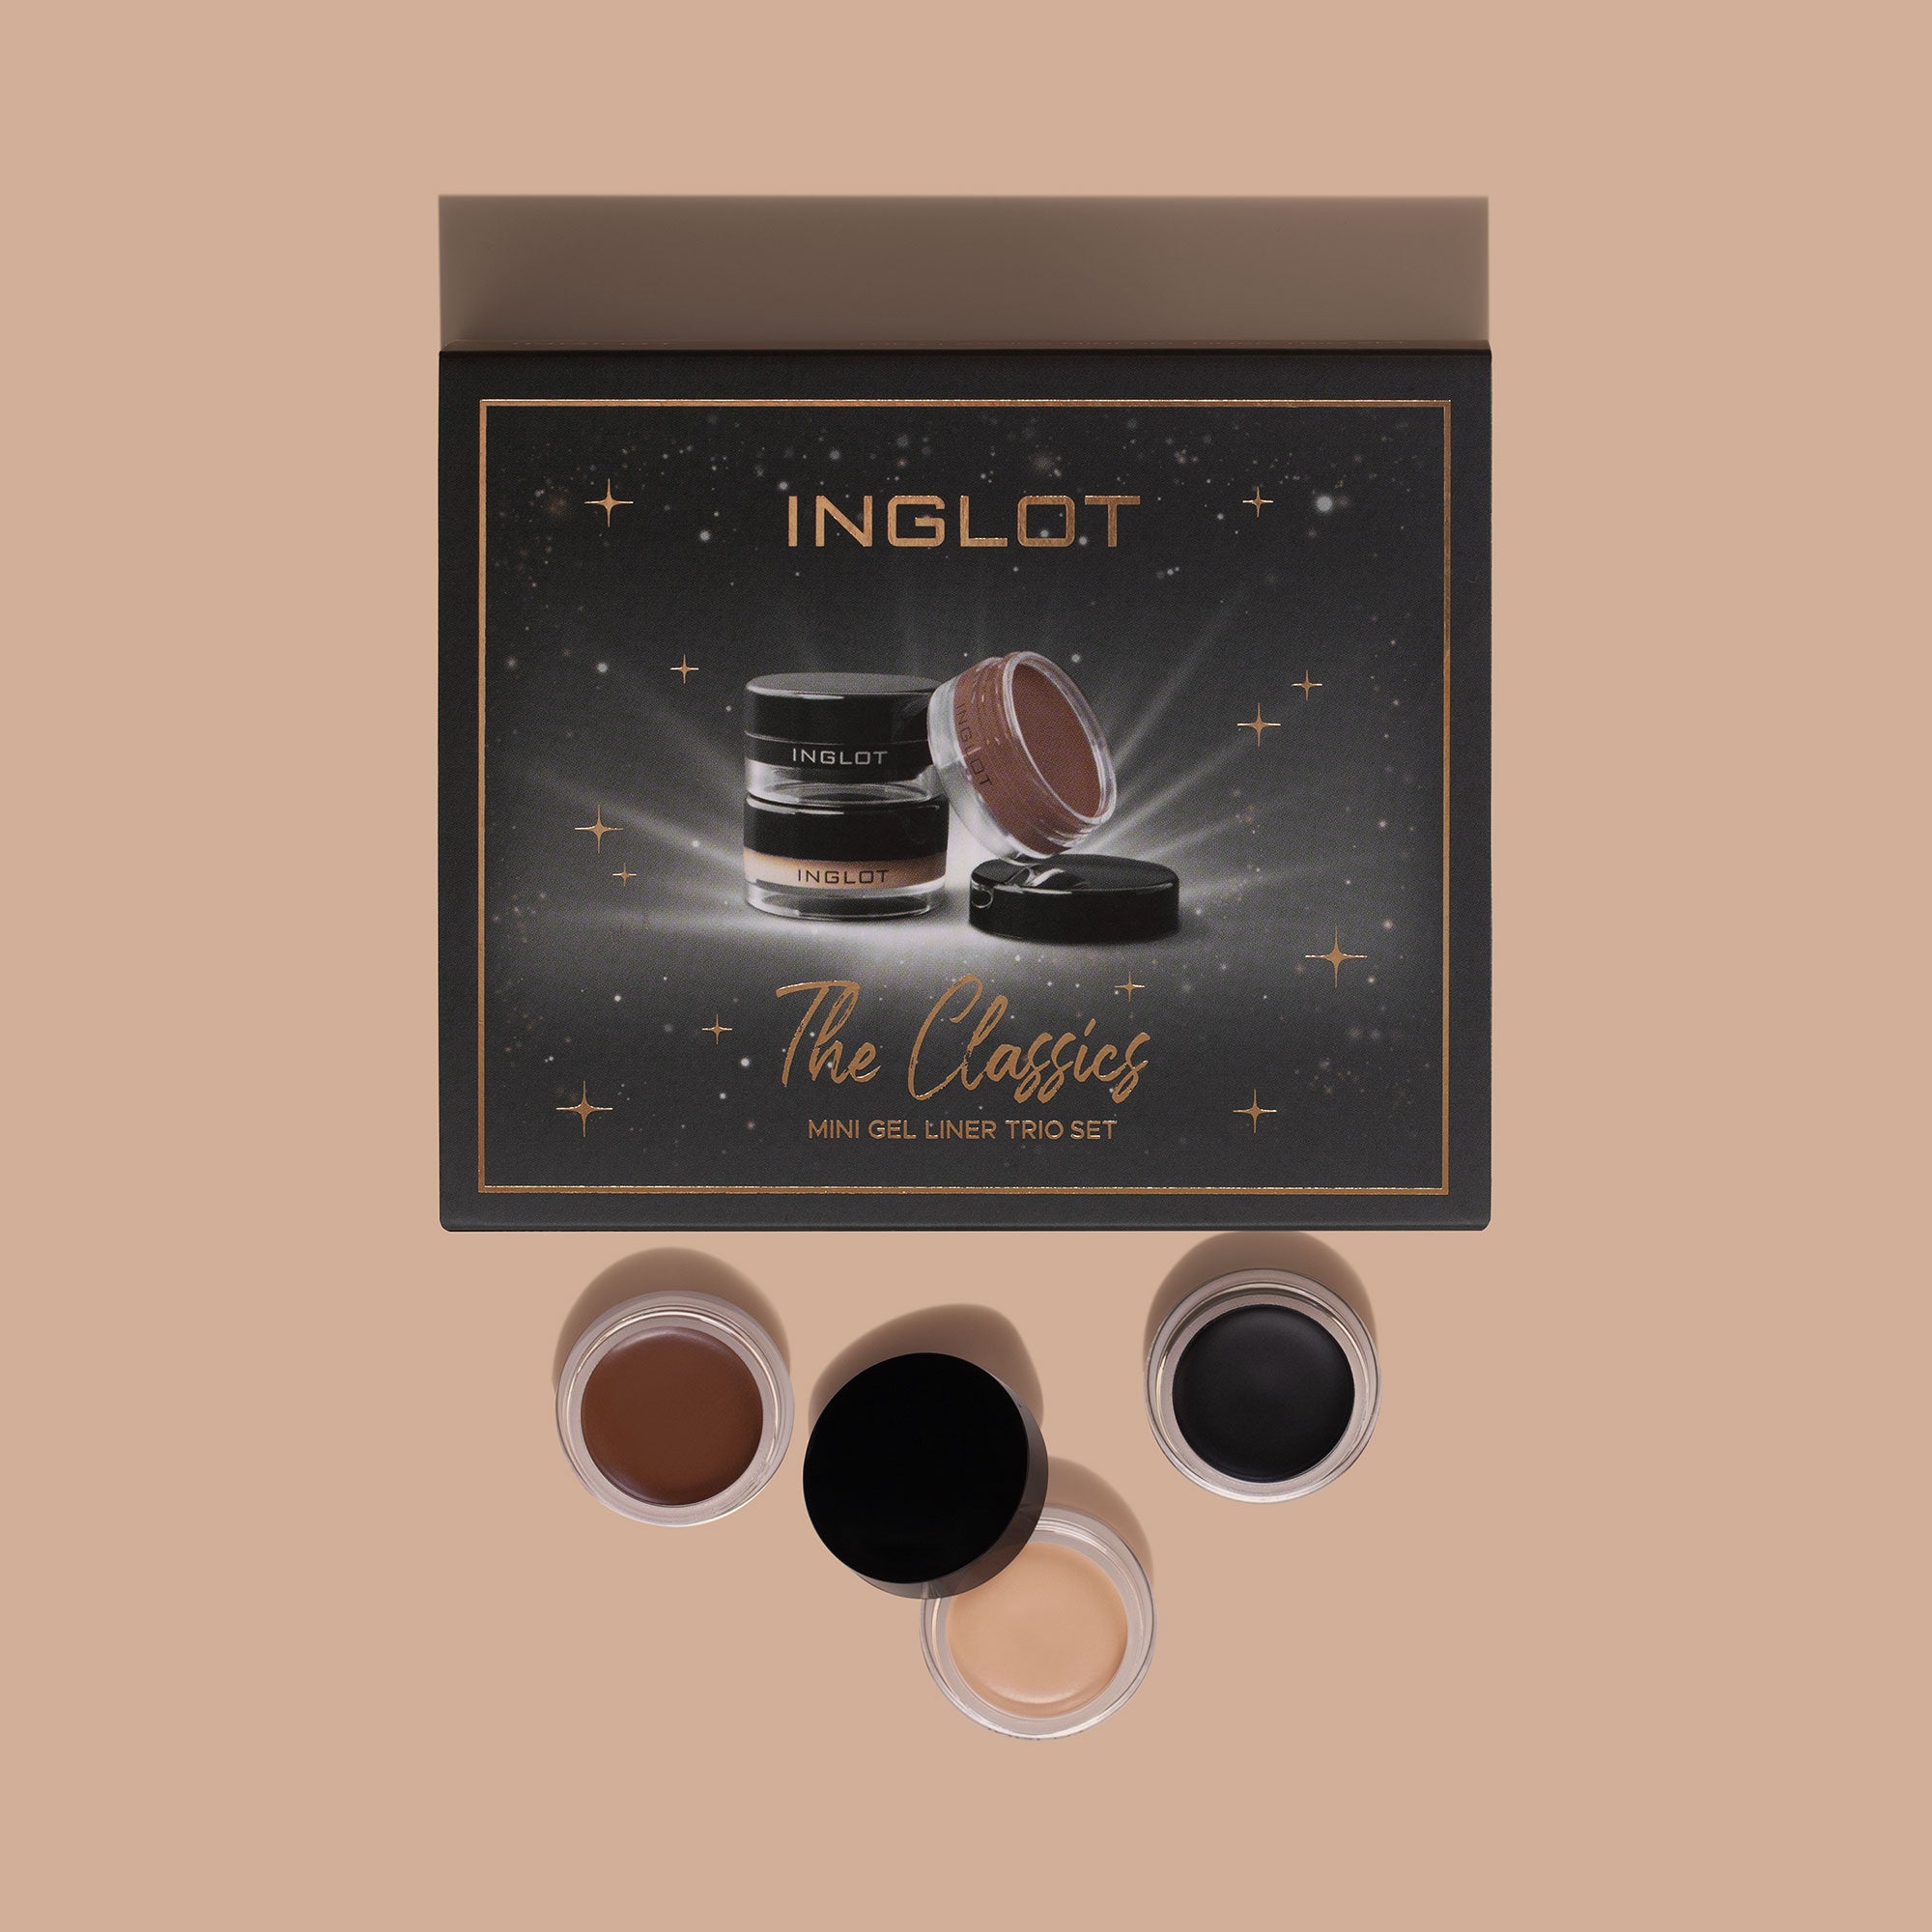 Inglot The Classics Mini Gel Liner Trio Gift Se, open with products dispalyed